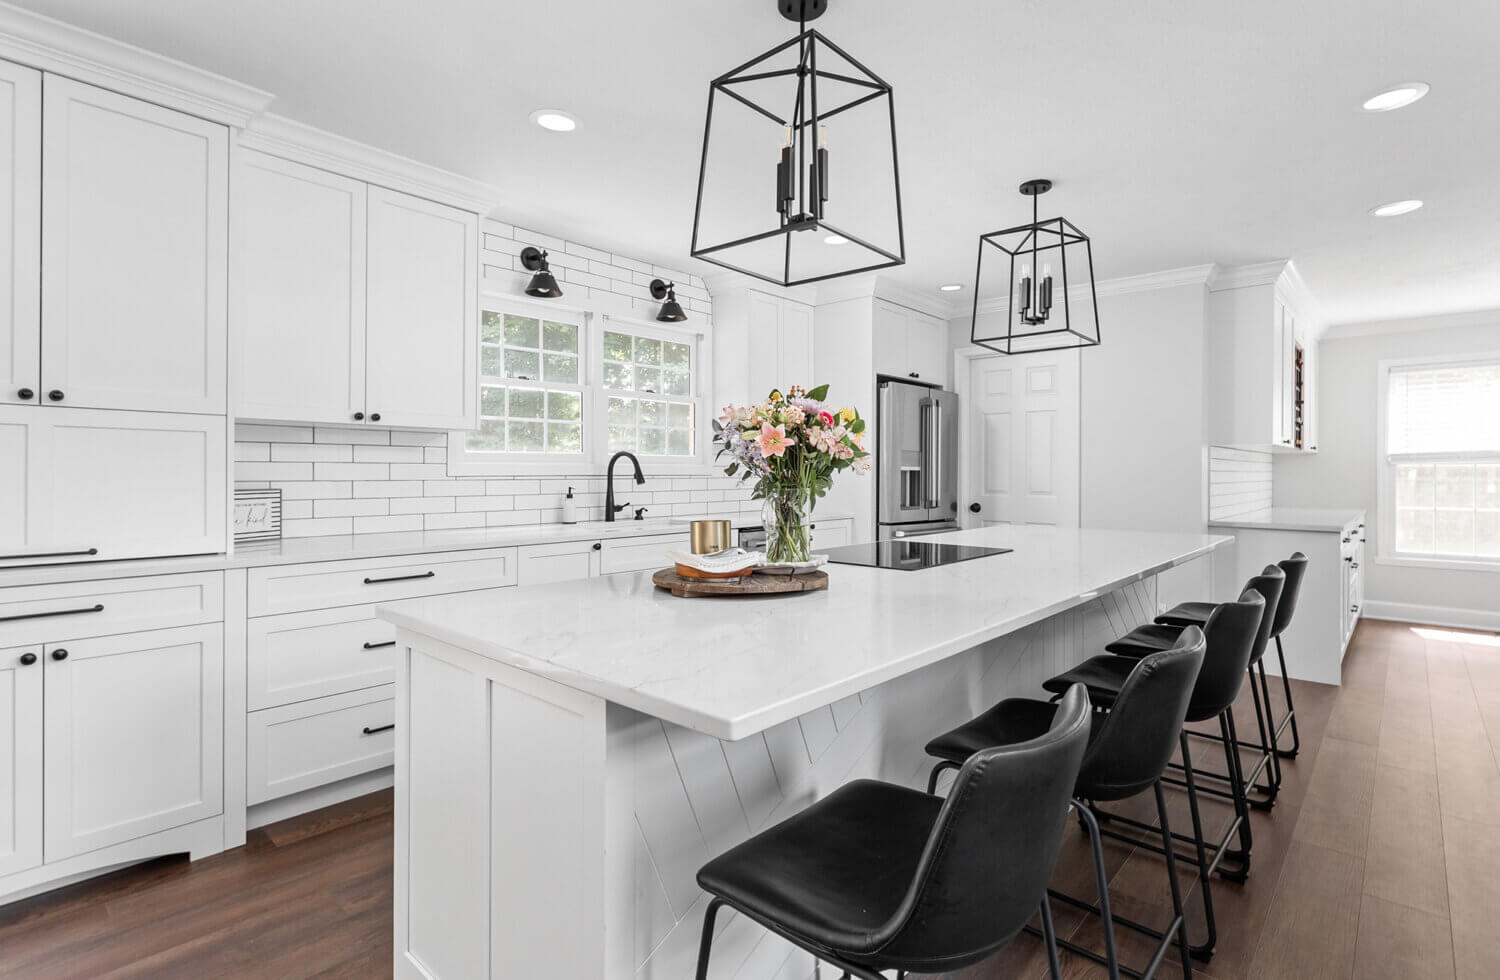 An all-white kitchen with bright white painted cabinets.